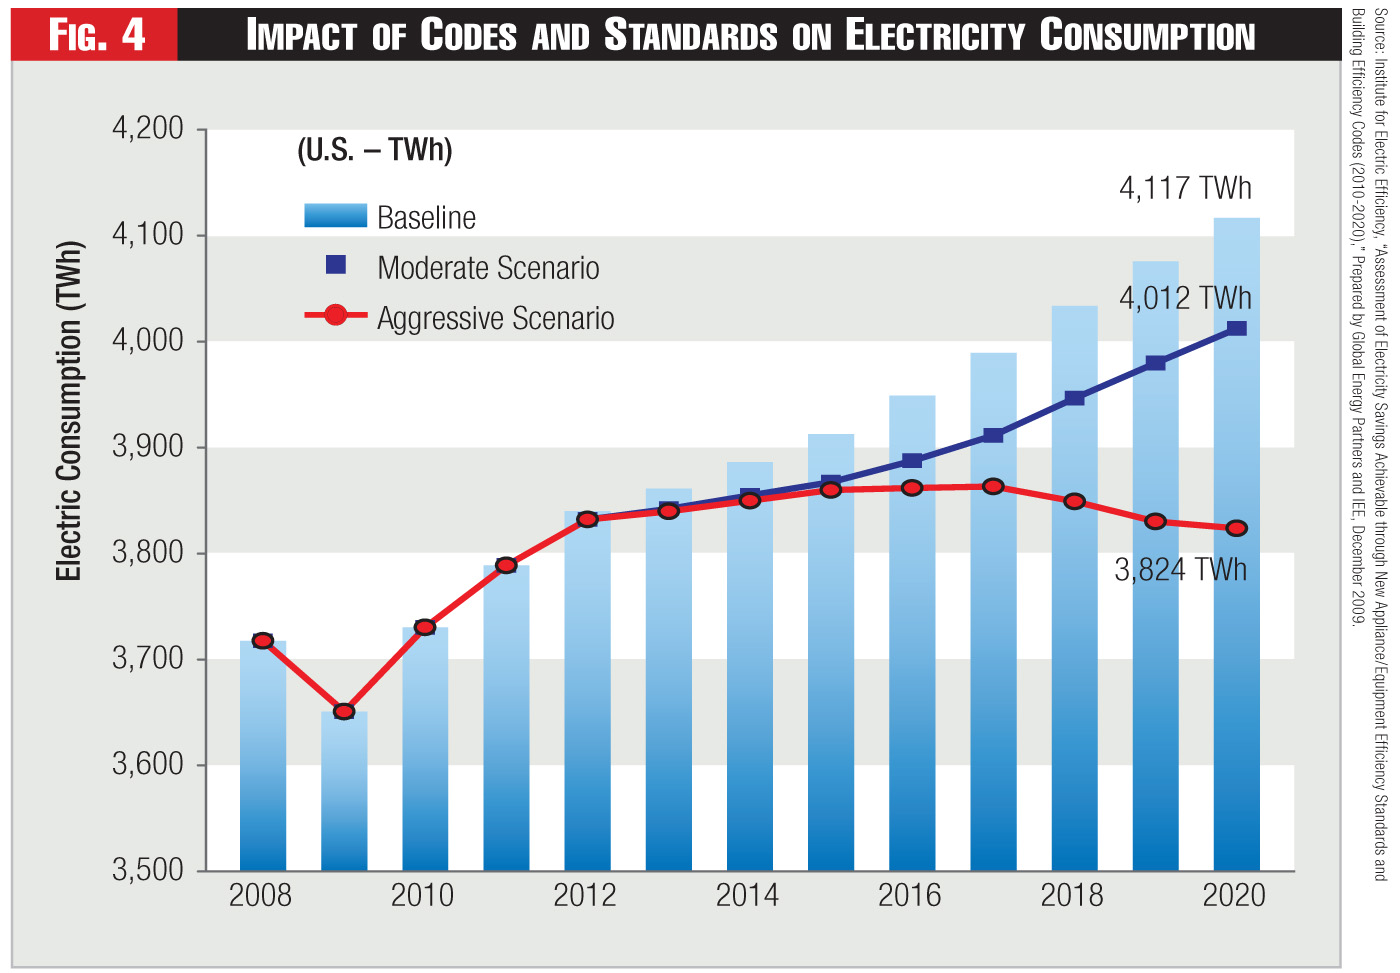 Figure 4 - Impact of Codes and Standards on Electricity Consumption